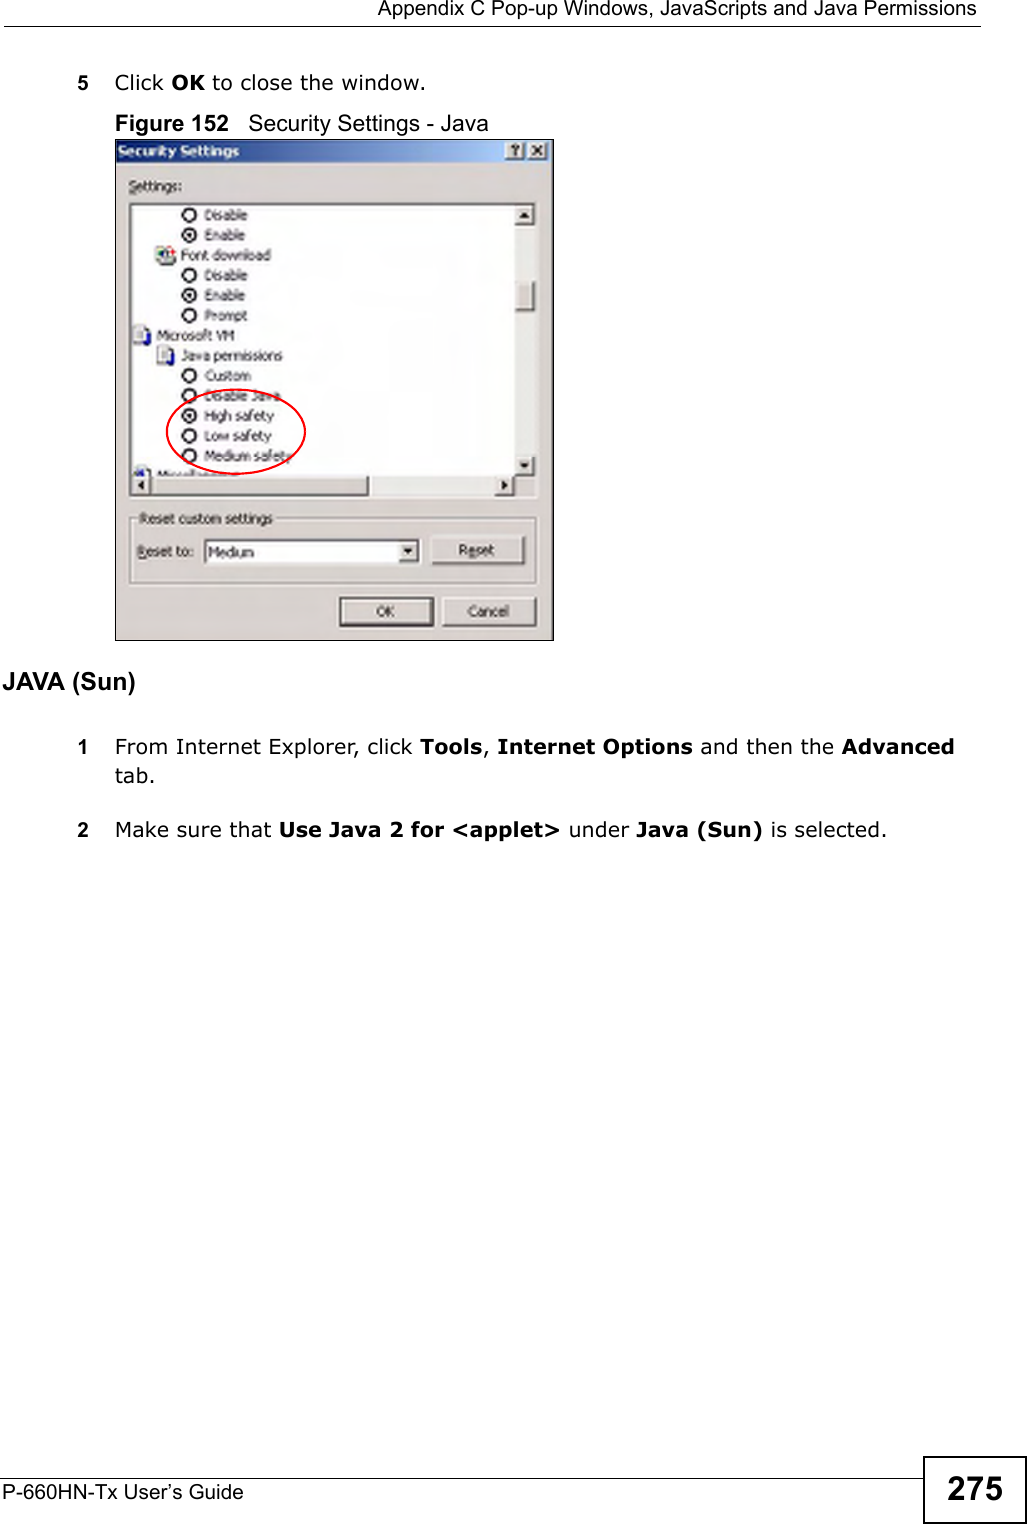  Appendix C Pop-up Windows, JavaScripts and Java PermissionsP-660HN-Tx User’s Guide 2755Click OK to close the window.Figure 152   Security Settings - Java JAVA (Sun)1From Internet Explorer, click Tools, Internet Options and then the Advanced tab. 2Make sure that Use Java 2 for &lt;applet&gt; under Java (Sun) is selected.